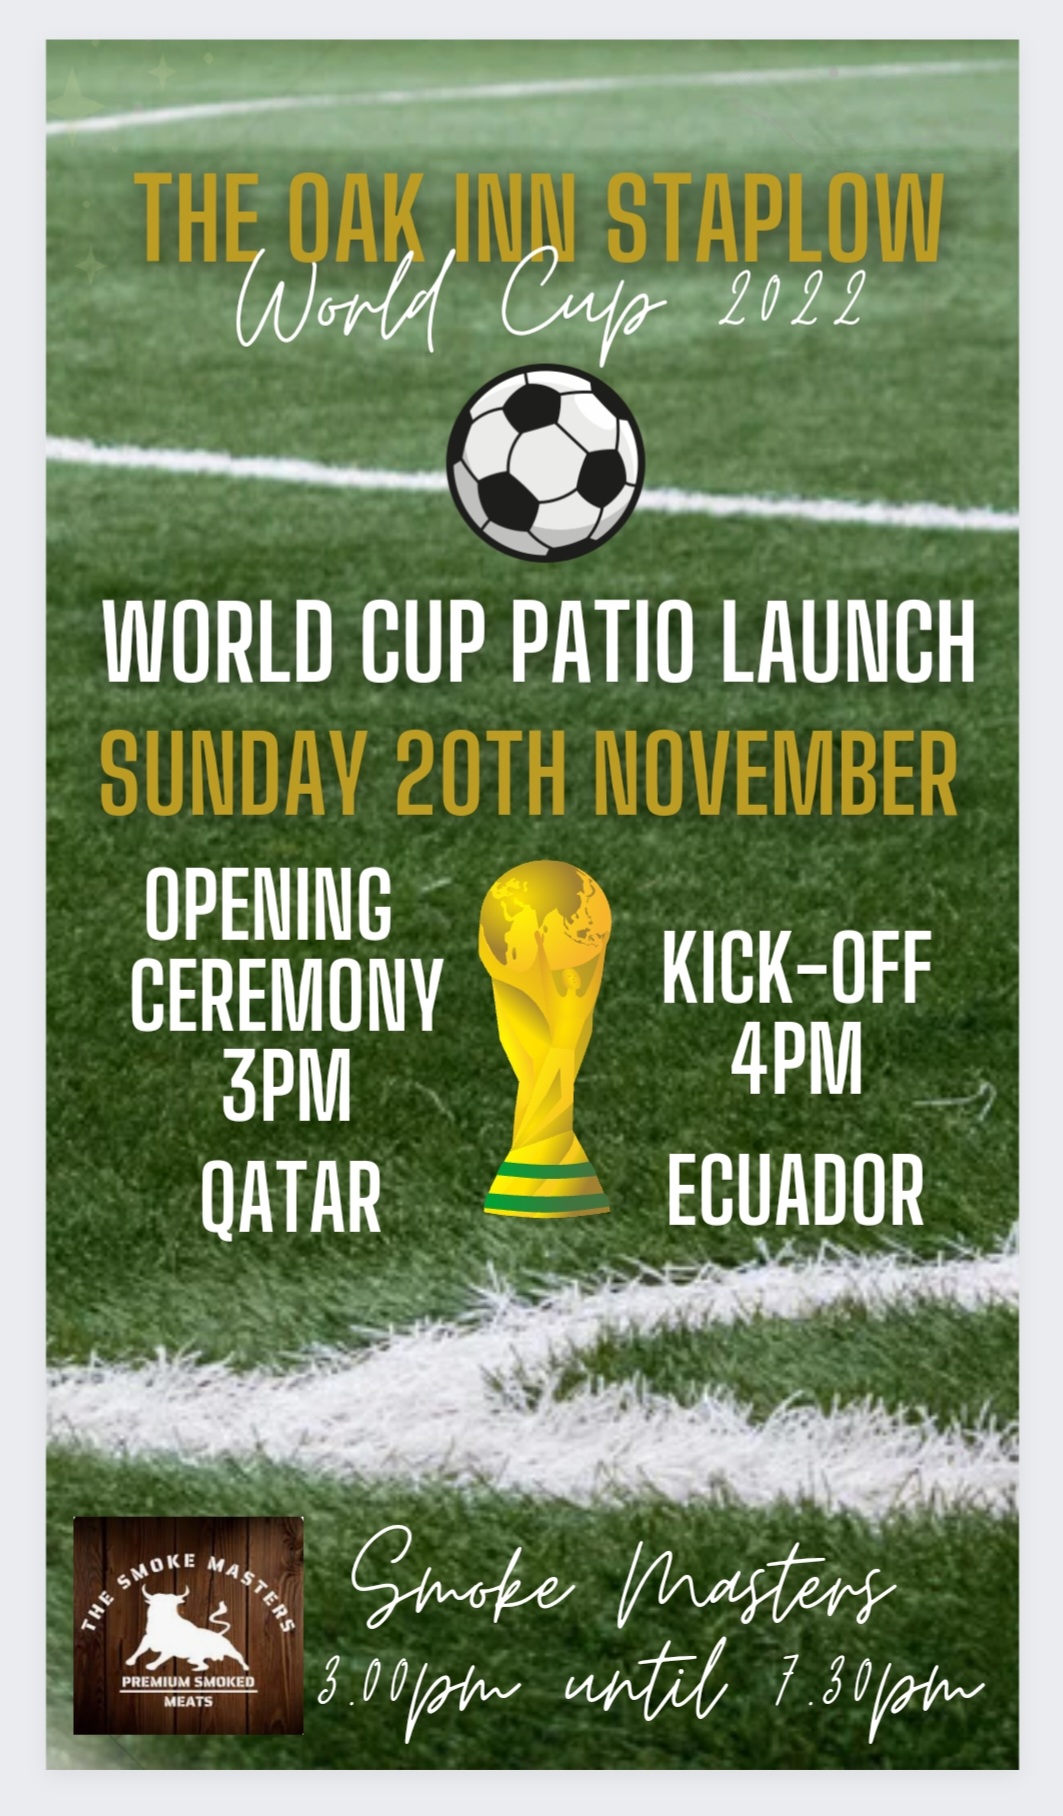 Watch the World cup launch Live TV at The Oak Inn Staplow Ledbury Herefordshire